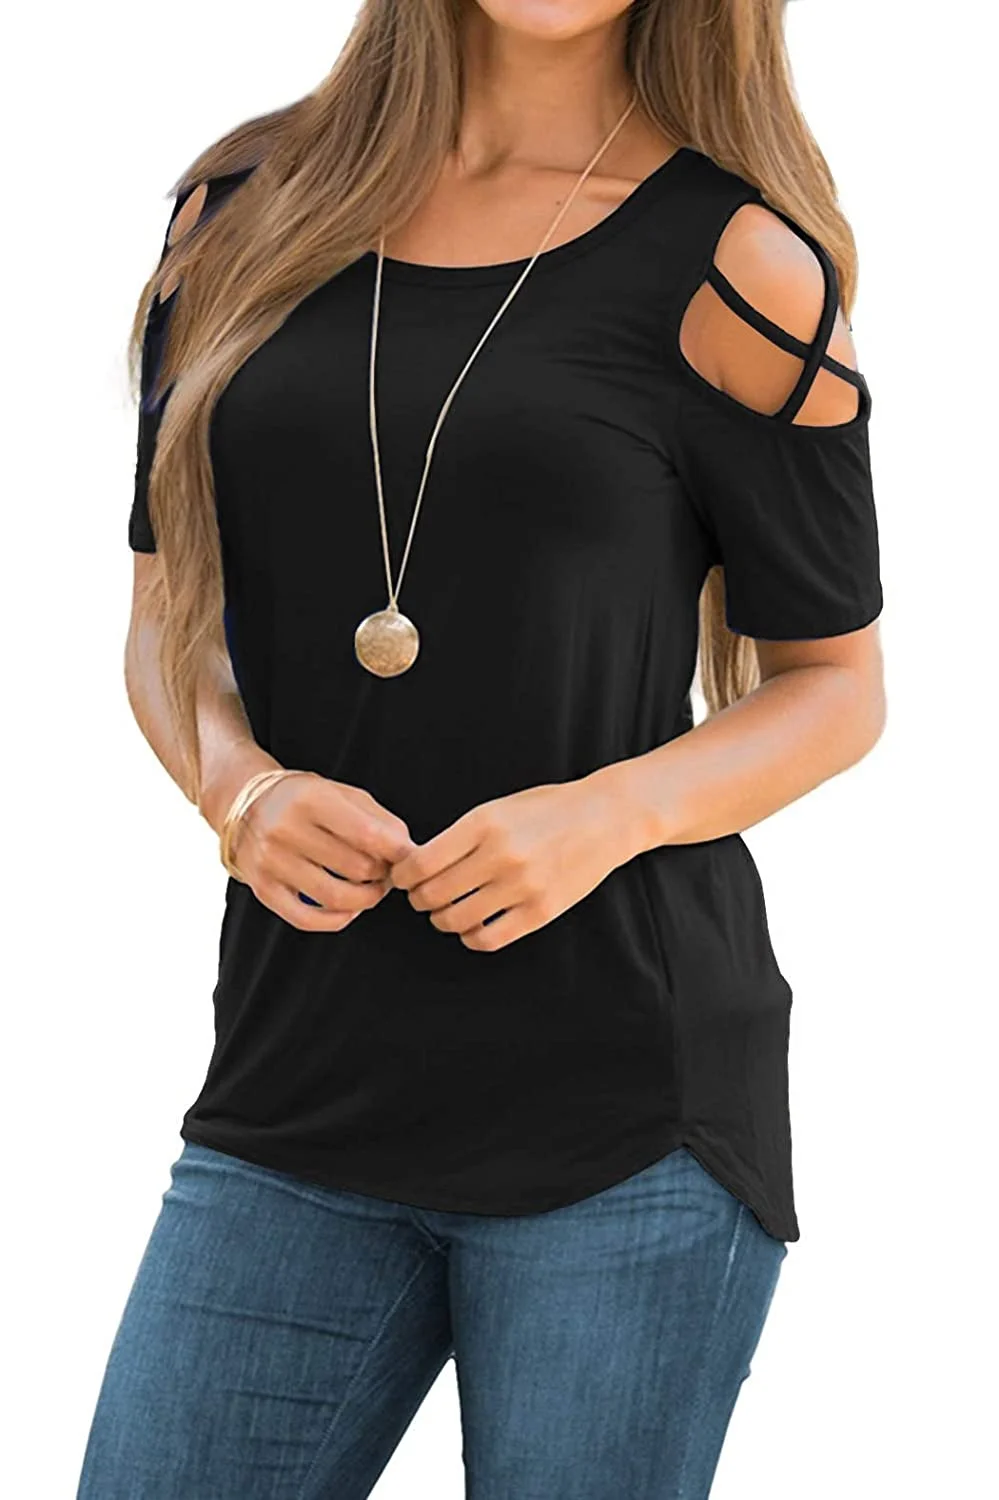 Women Short Sleeve Strappy Cold Shoulder T-Shirt Tops Blouses